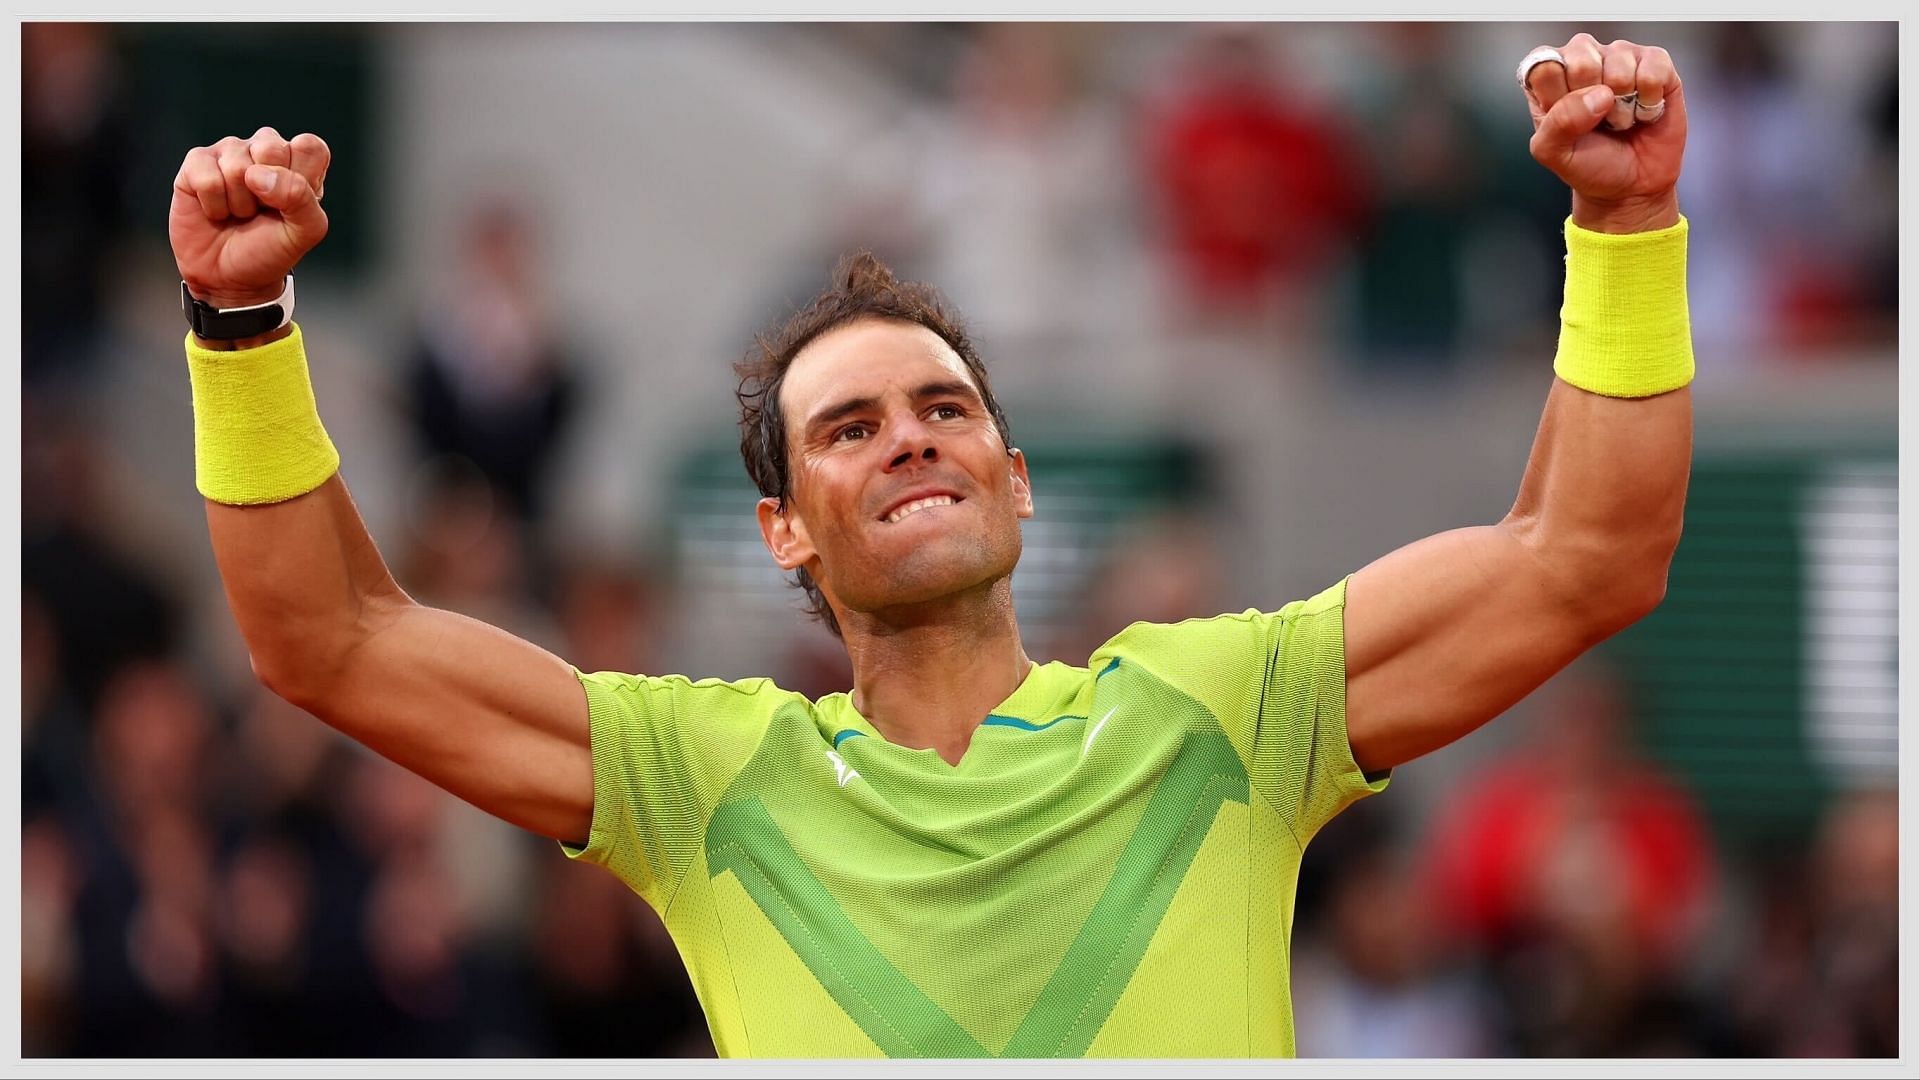 Rafael Nadal is the greatest clay court player in tennis history with 14 French Open titles under his best